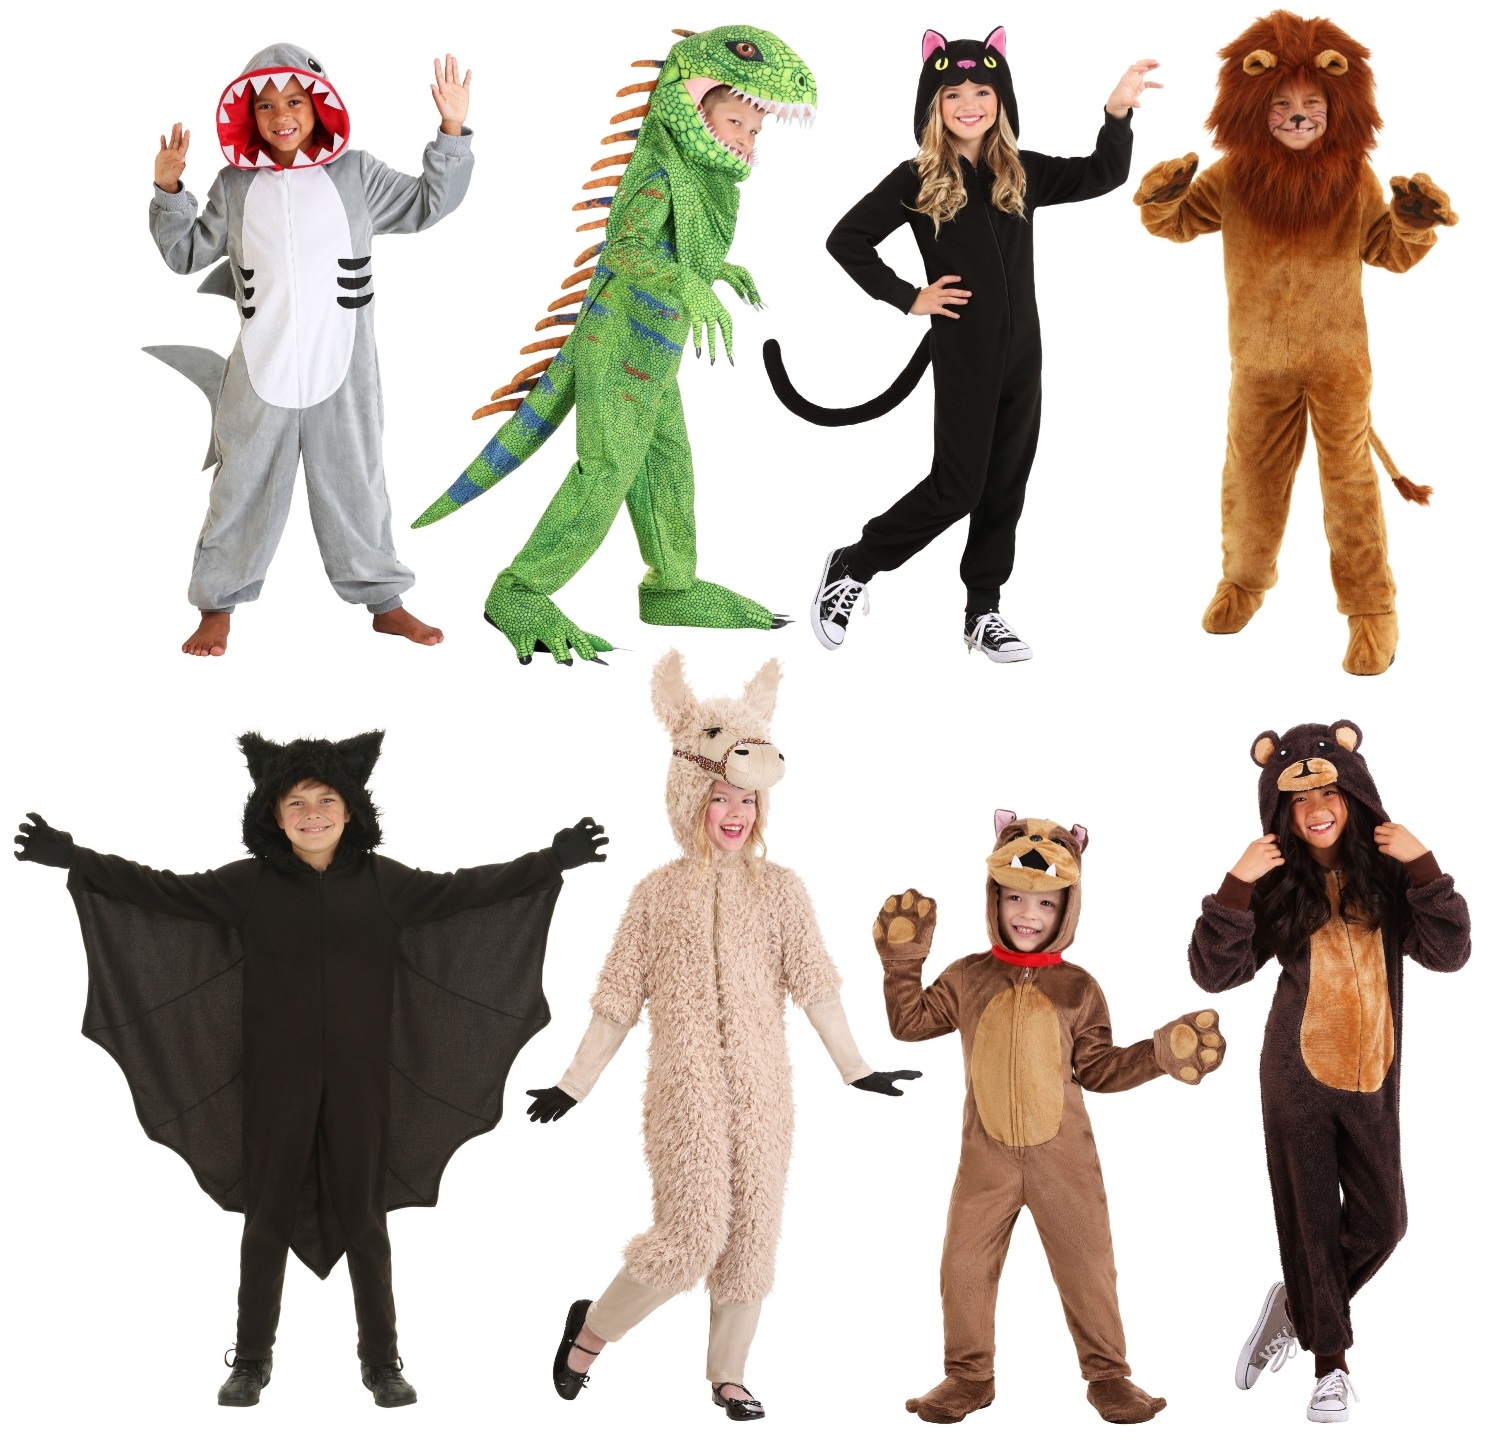 Cold Weather Costumes for Trick-or-Treating - HalloweenCostumes.com Blog